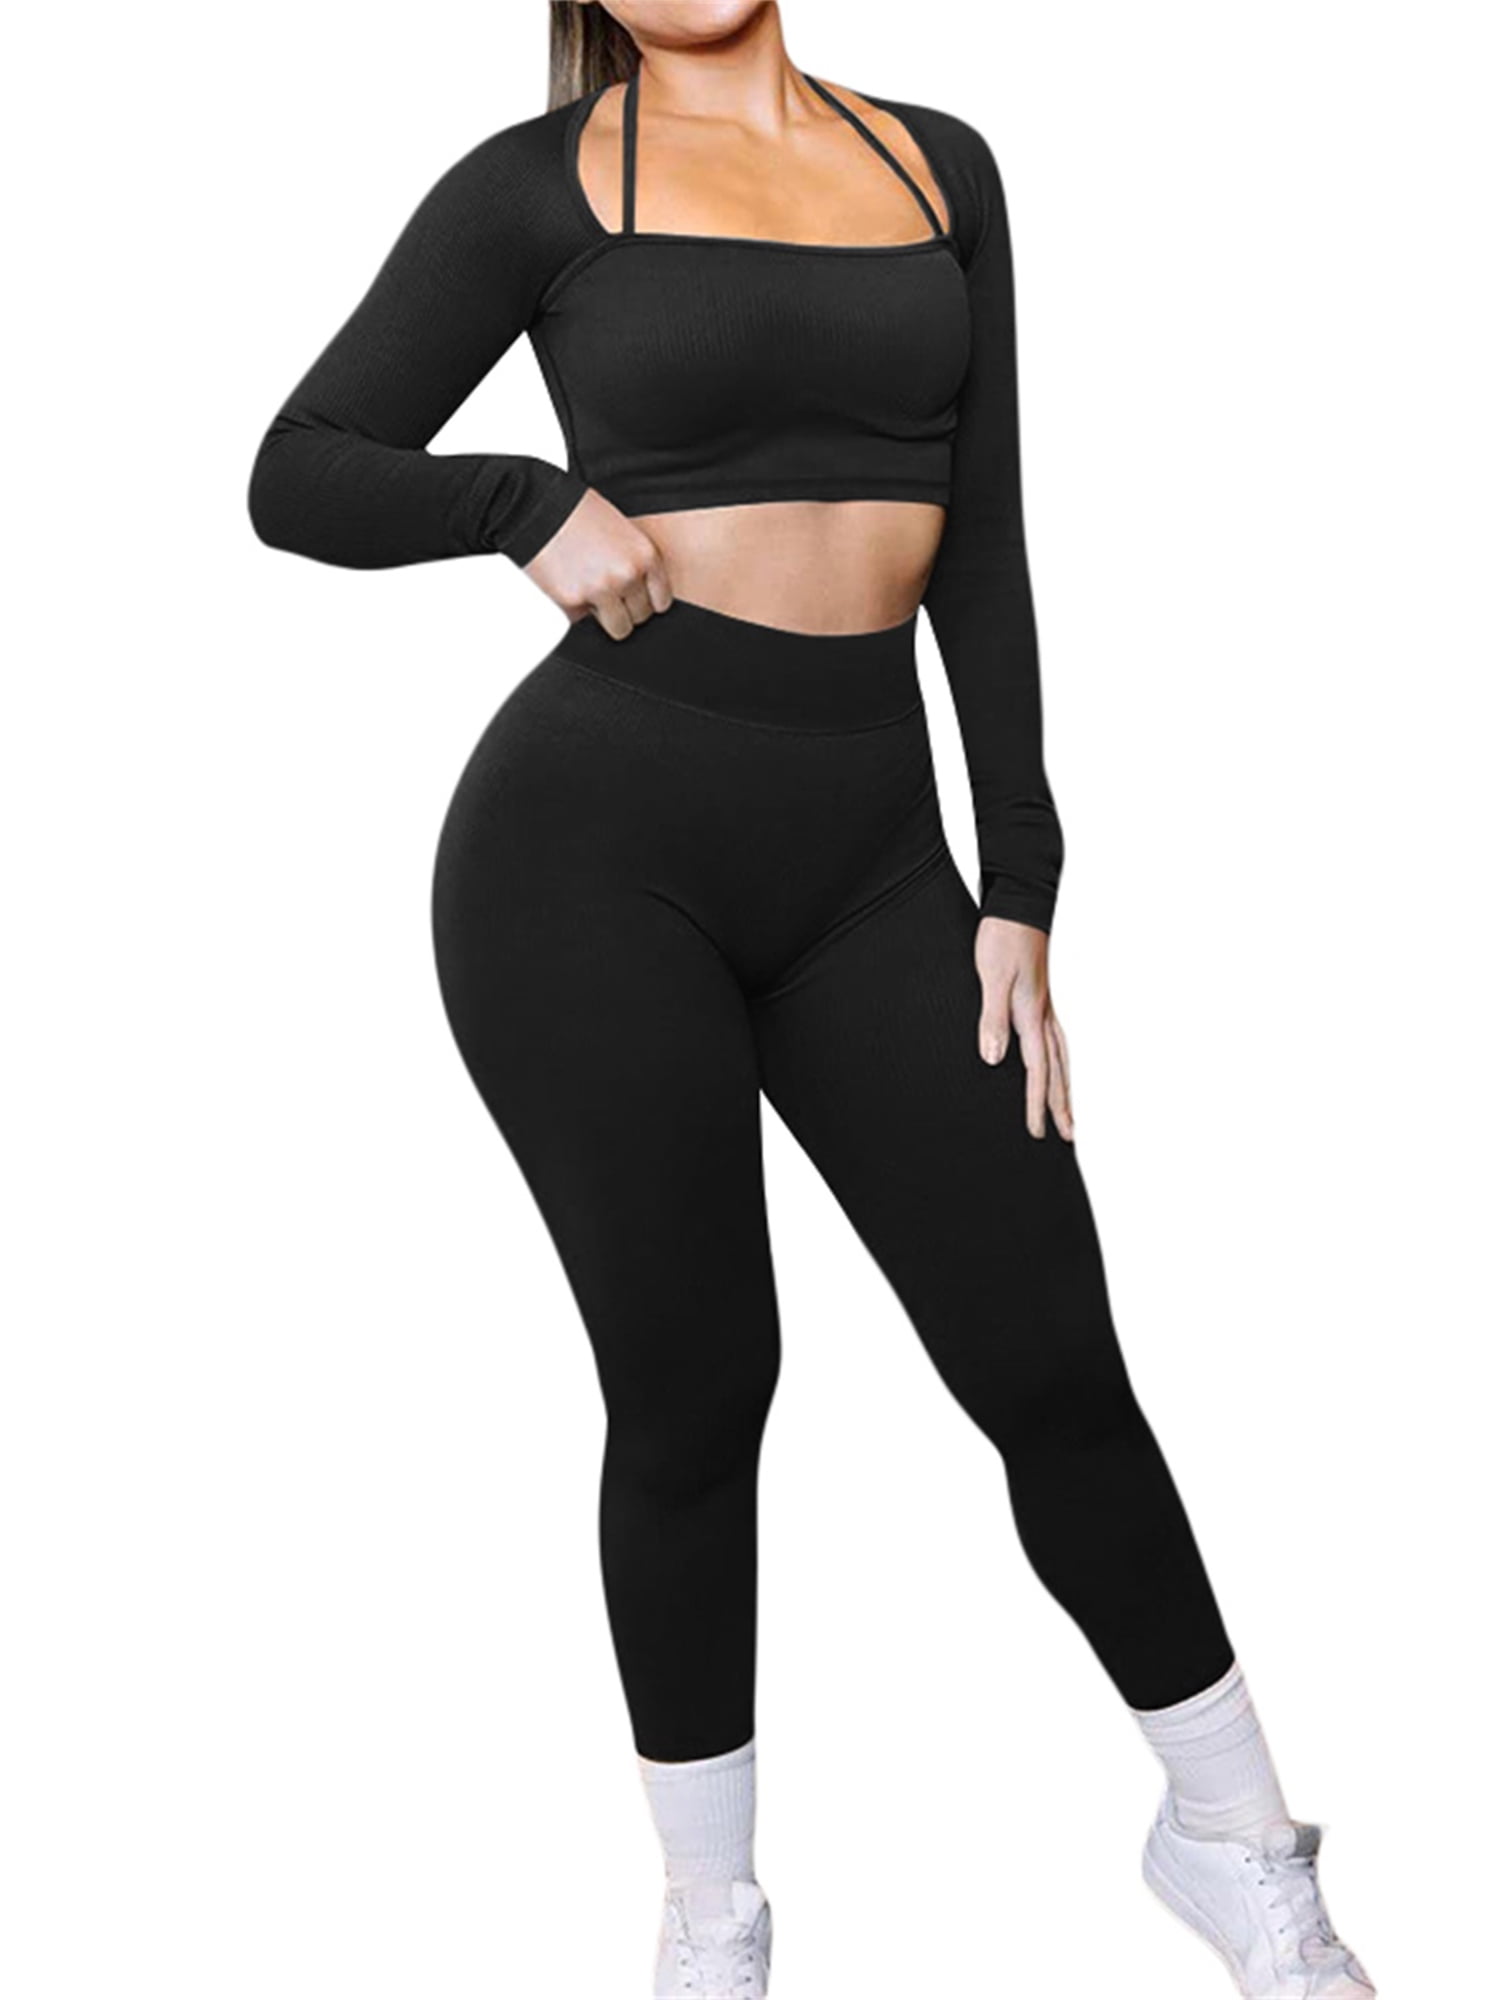 Designer Womens Two Piece Fitness Set White And Black Sportswear Outfits  With Long Sleeve Crop Top And Legging Outfits From Designer_2023, $23.55